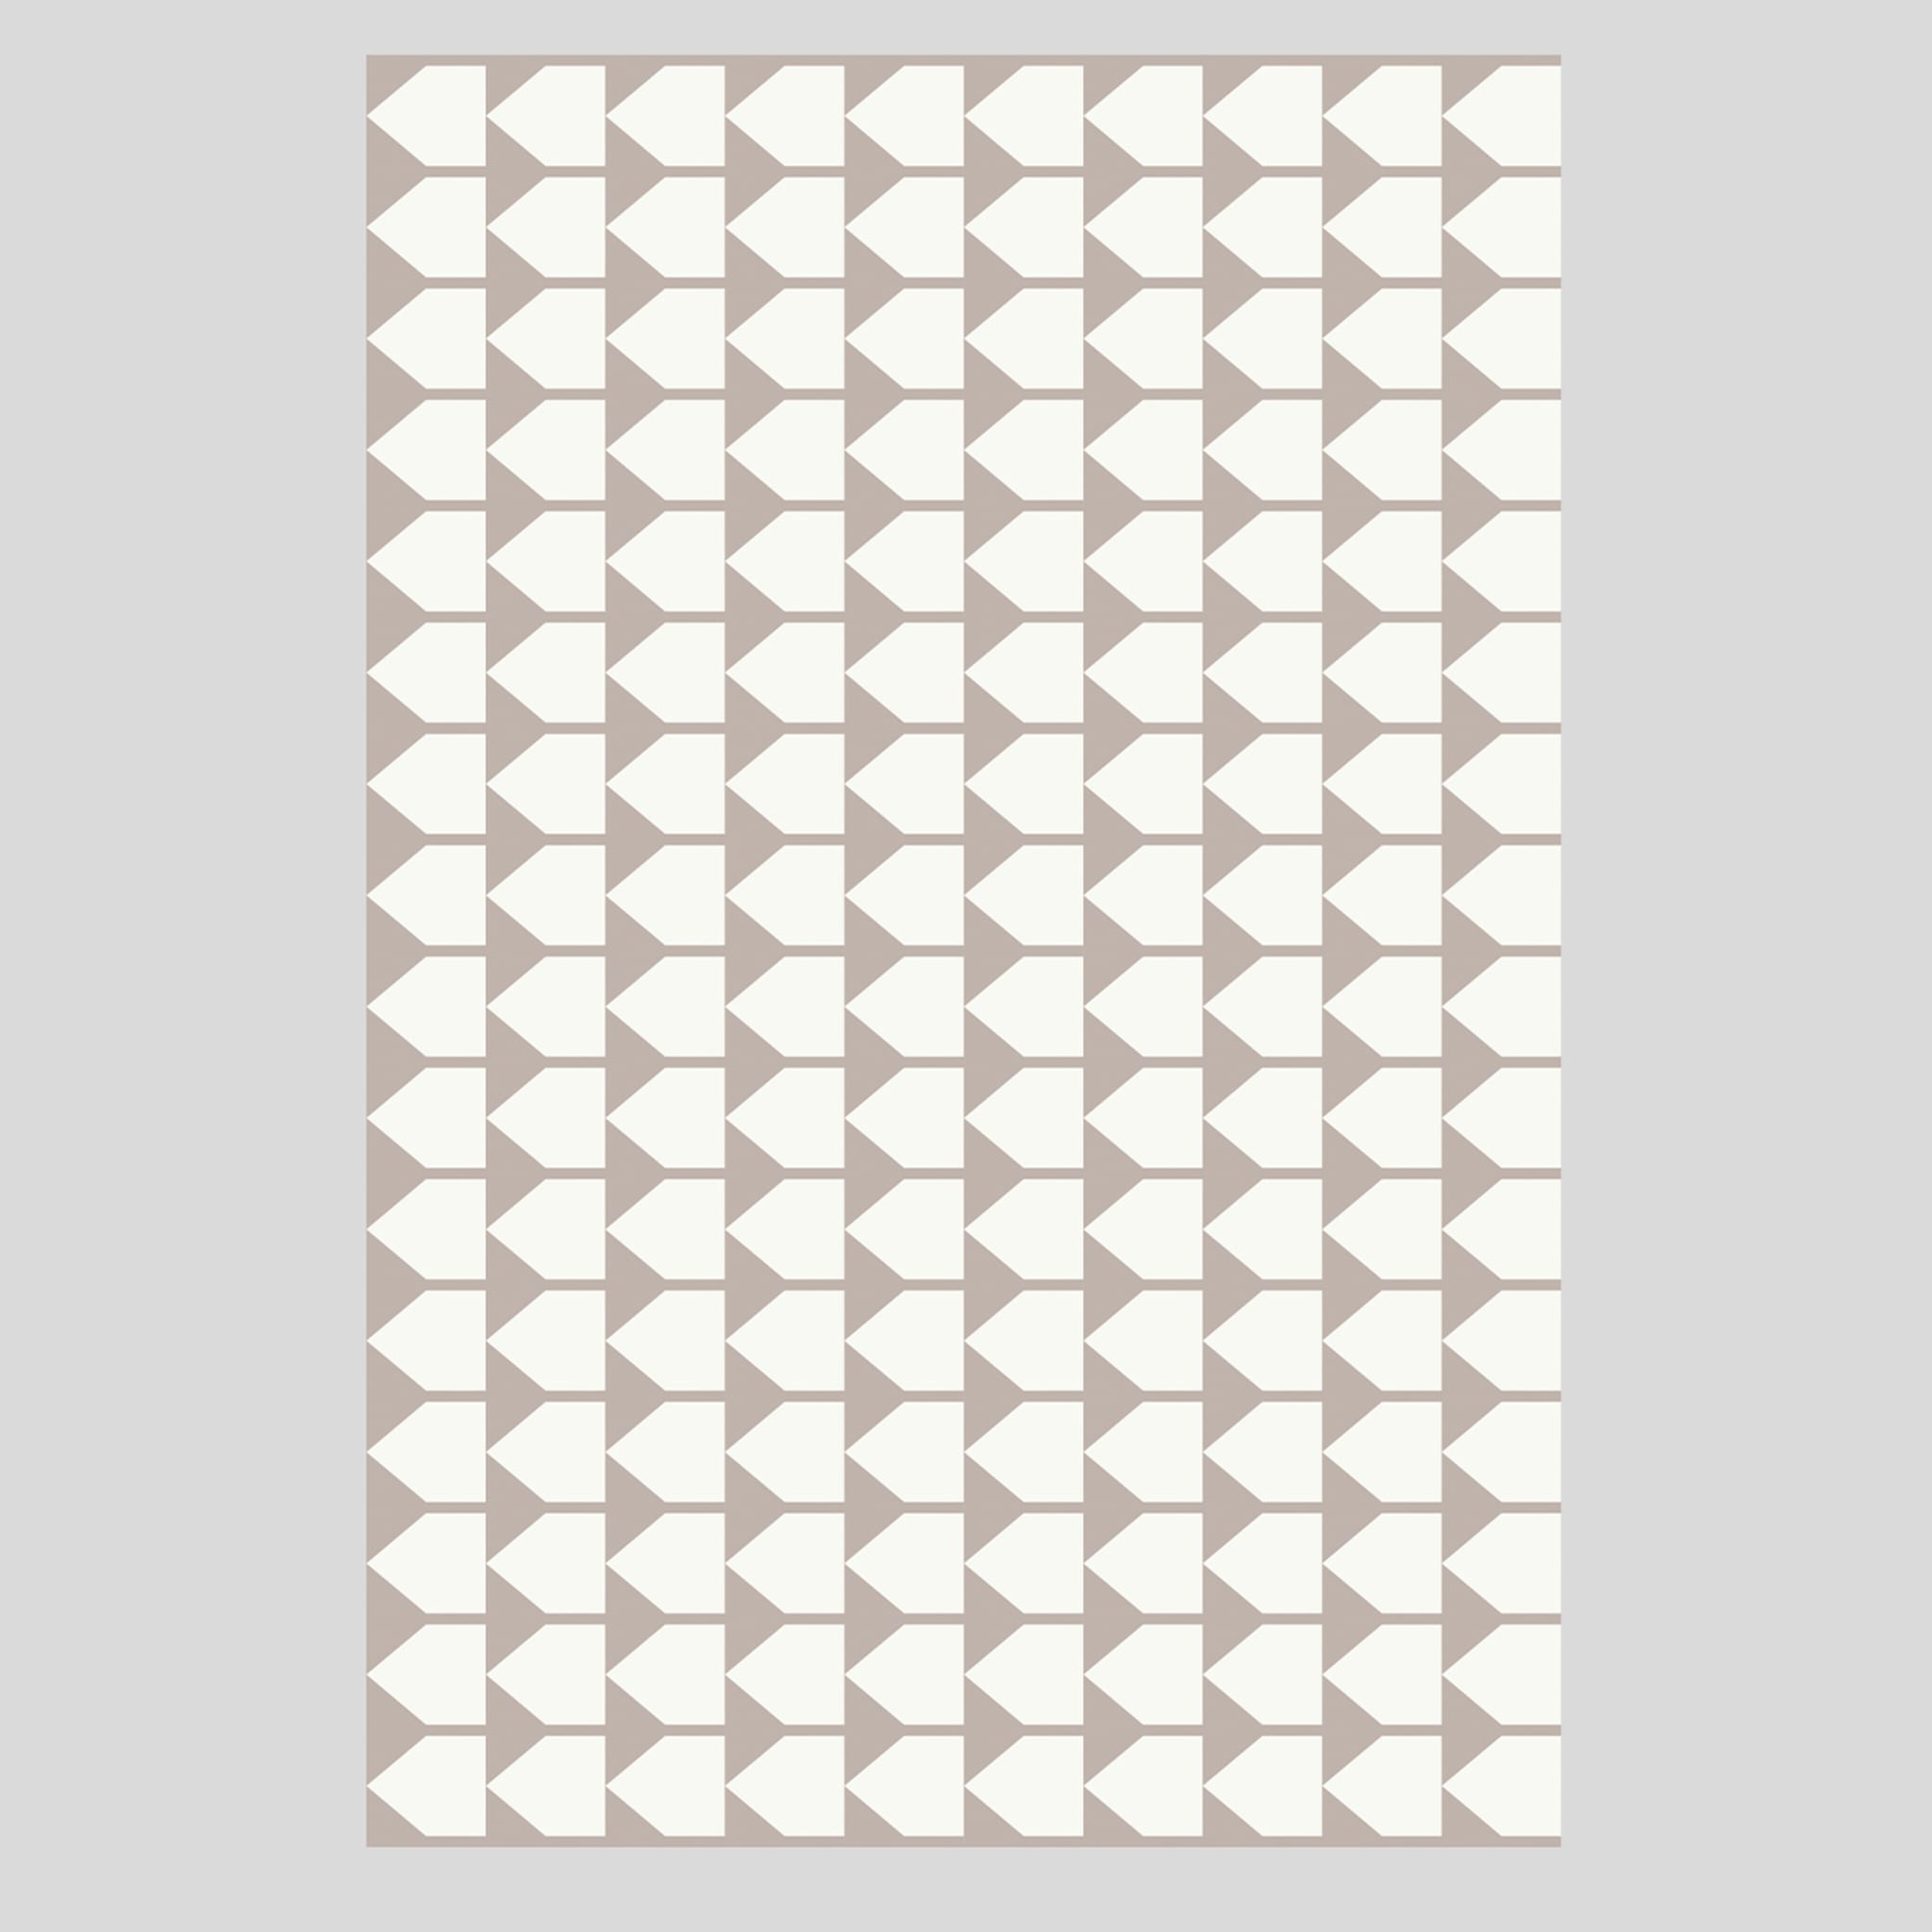 Archetipo Taupe/White Blanket by Makeyourhome + Walter Terruso - Alternative view 3